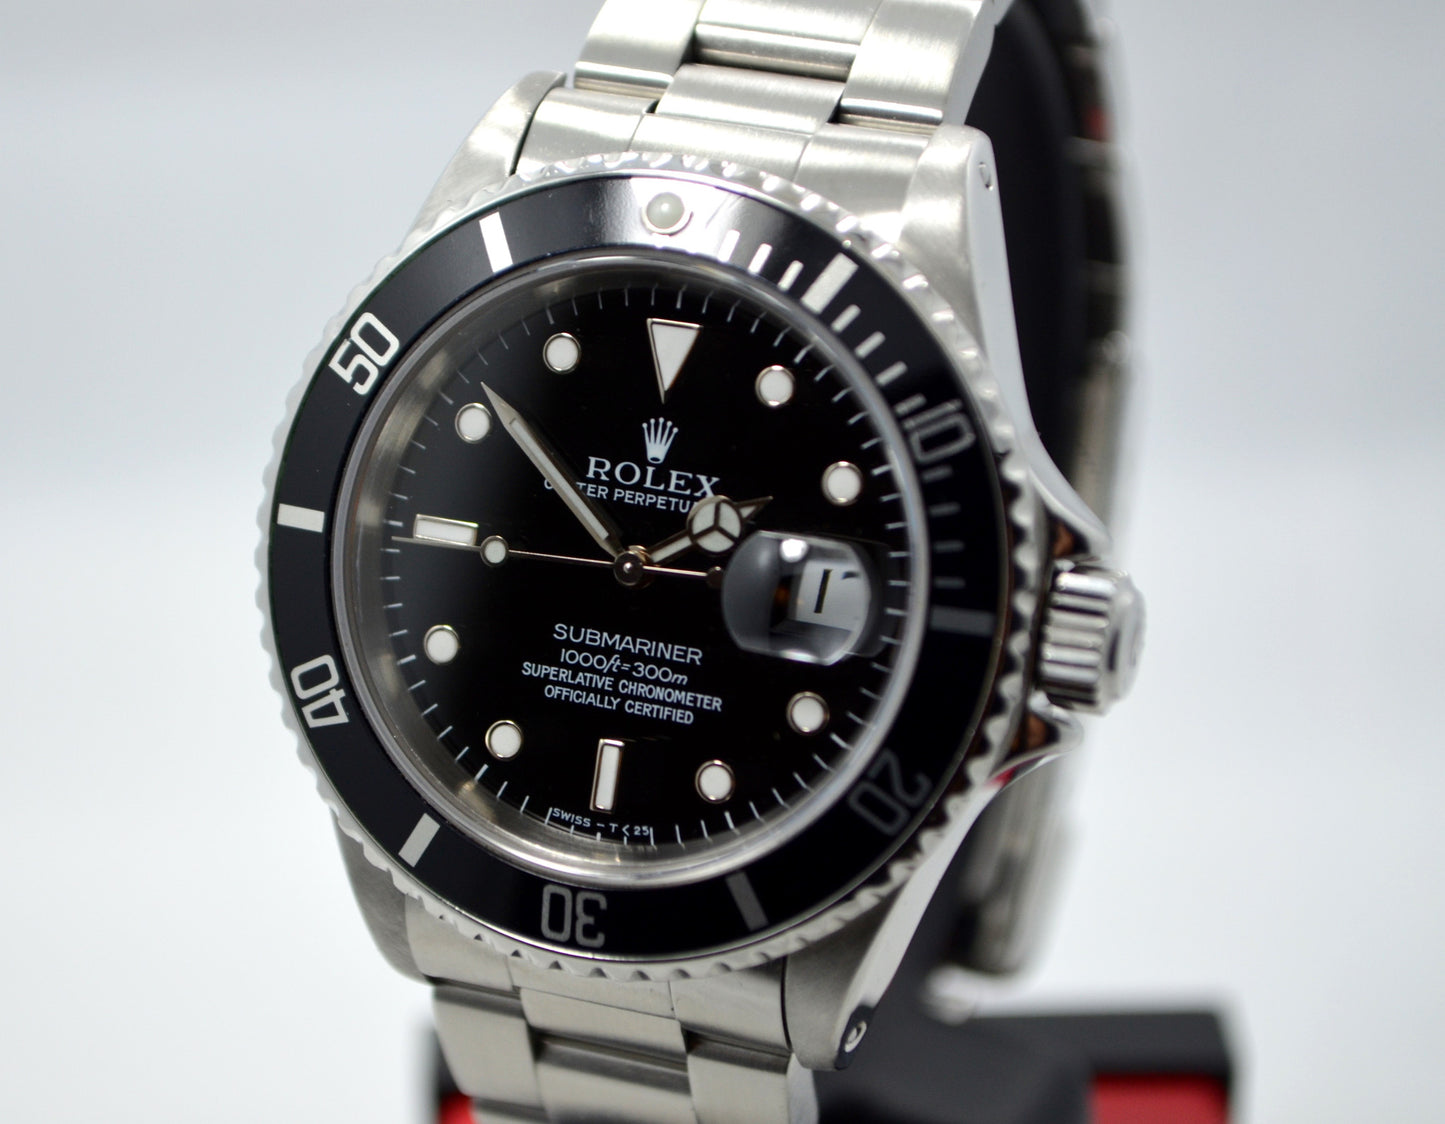 Rolex Submariner 16610 Stainless Steel "X" Serial 1991 Wristwatch Box and Papers - Hashtag Watch Company